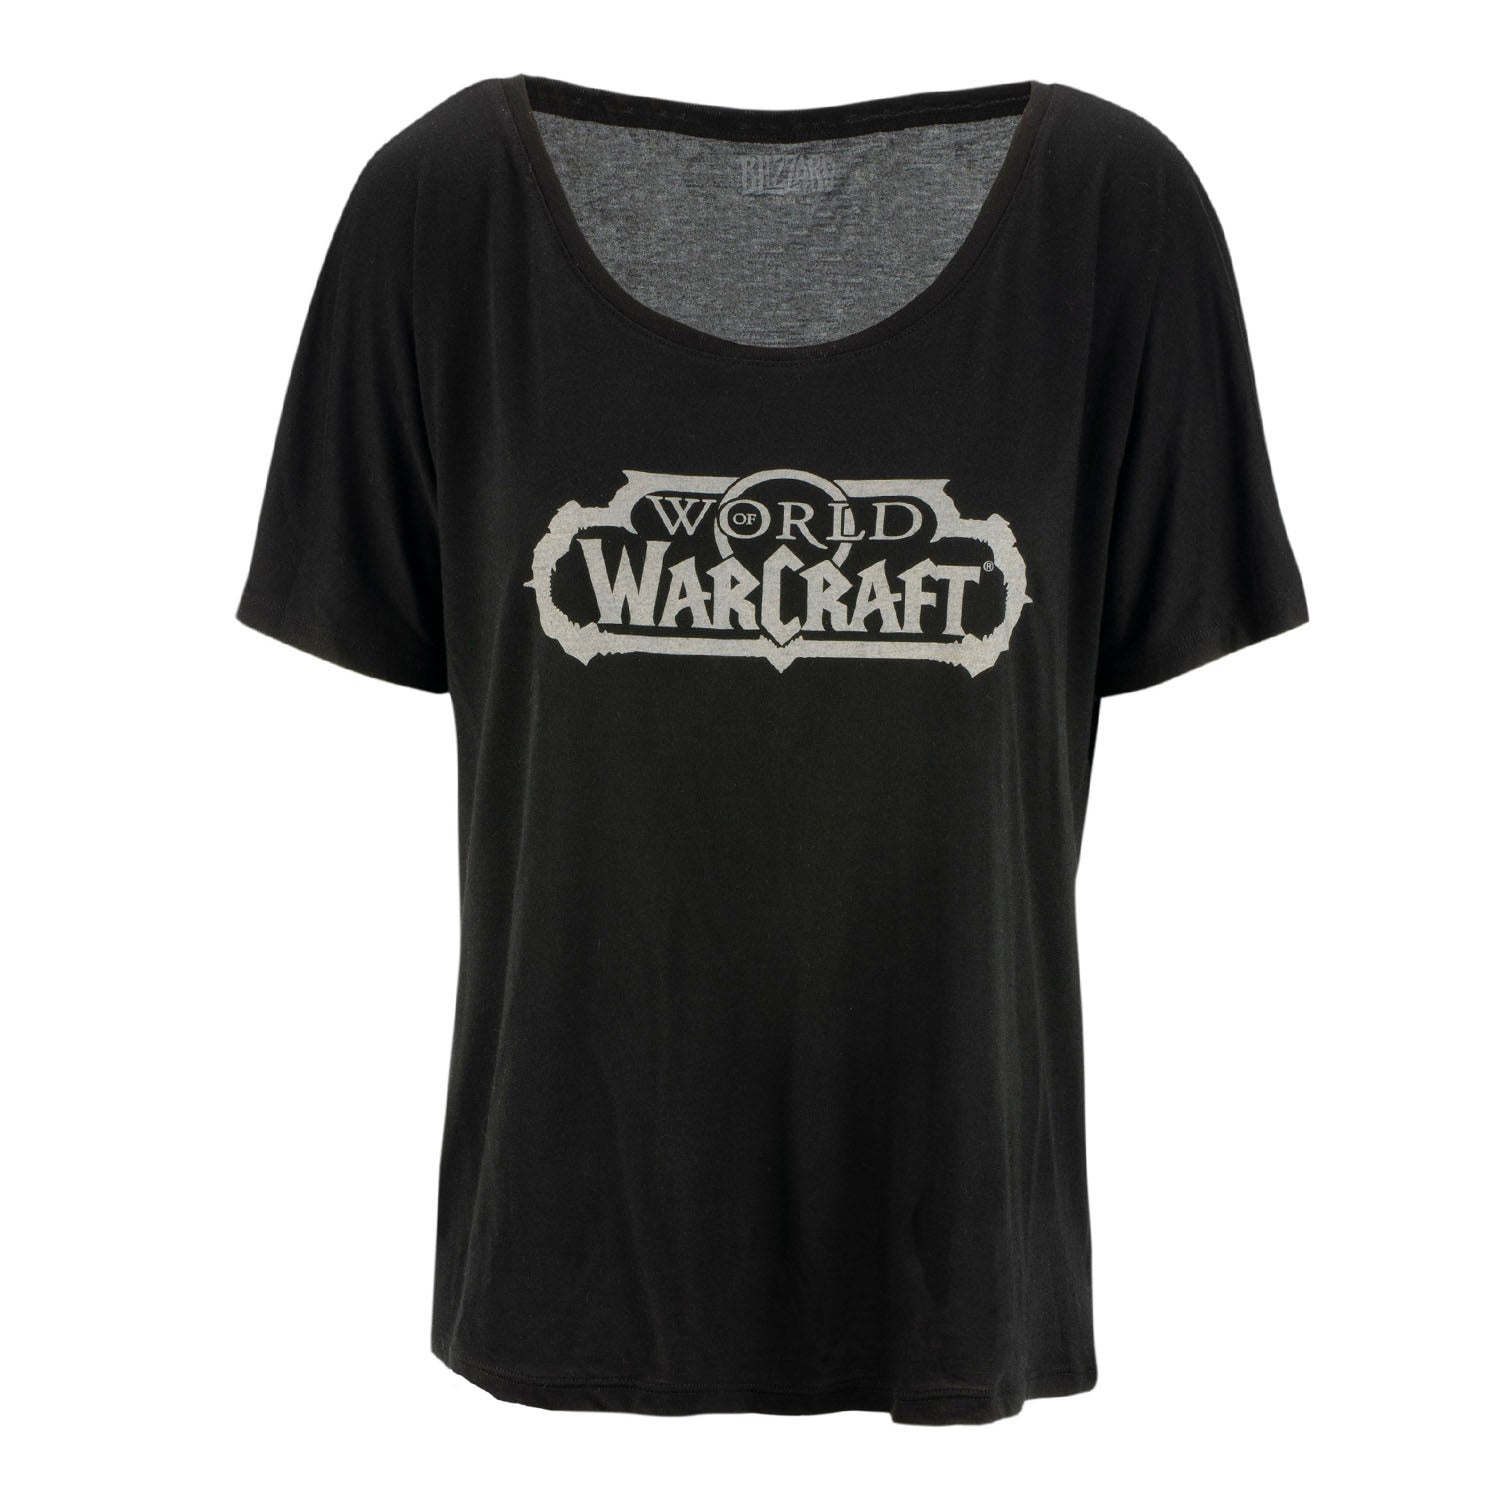 World of Warcraft Women's Black Slouchy T-Shirt - Front View